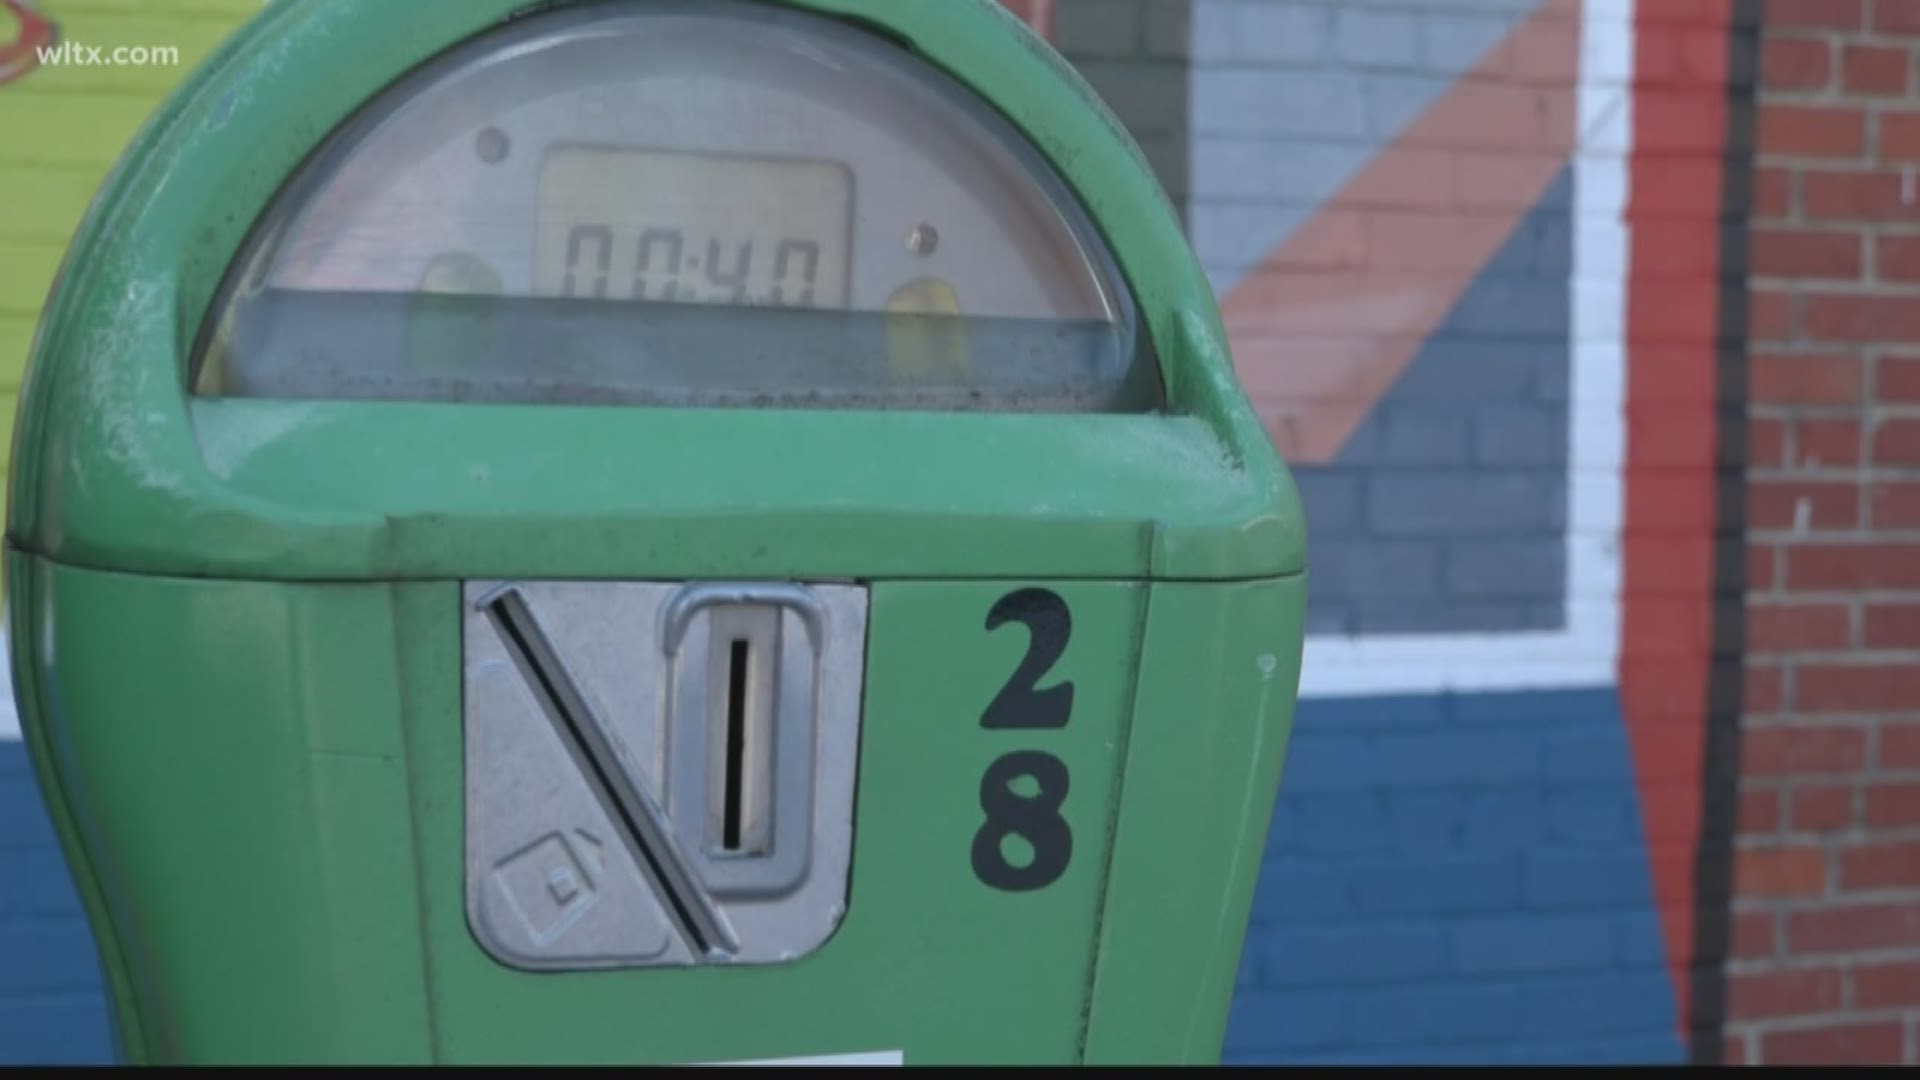 The hours that you have to pay for parking in parts of the City of Columbia may be changing, including parking fees during the evenings and on Saturdays.